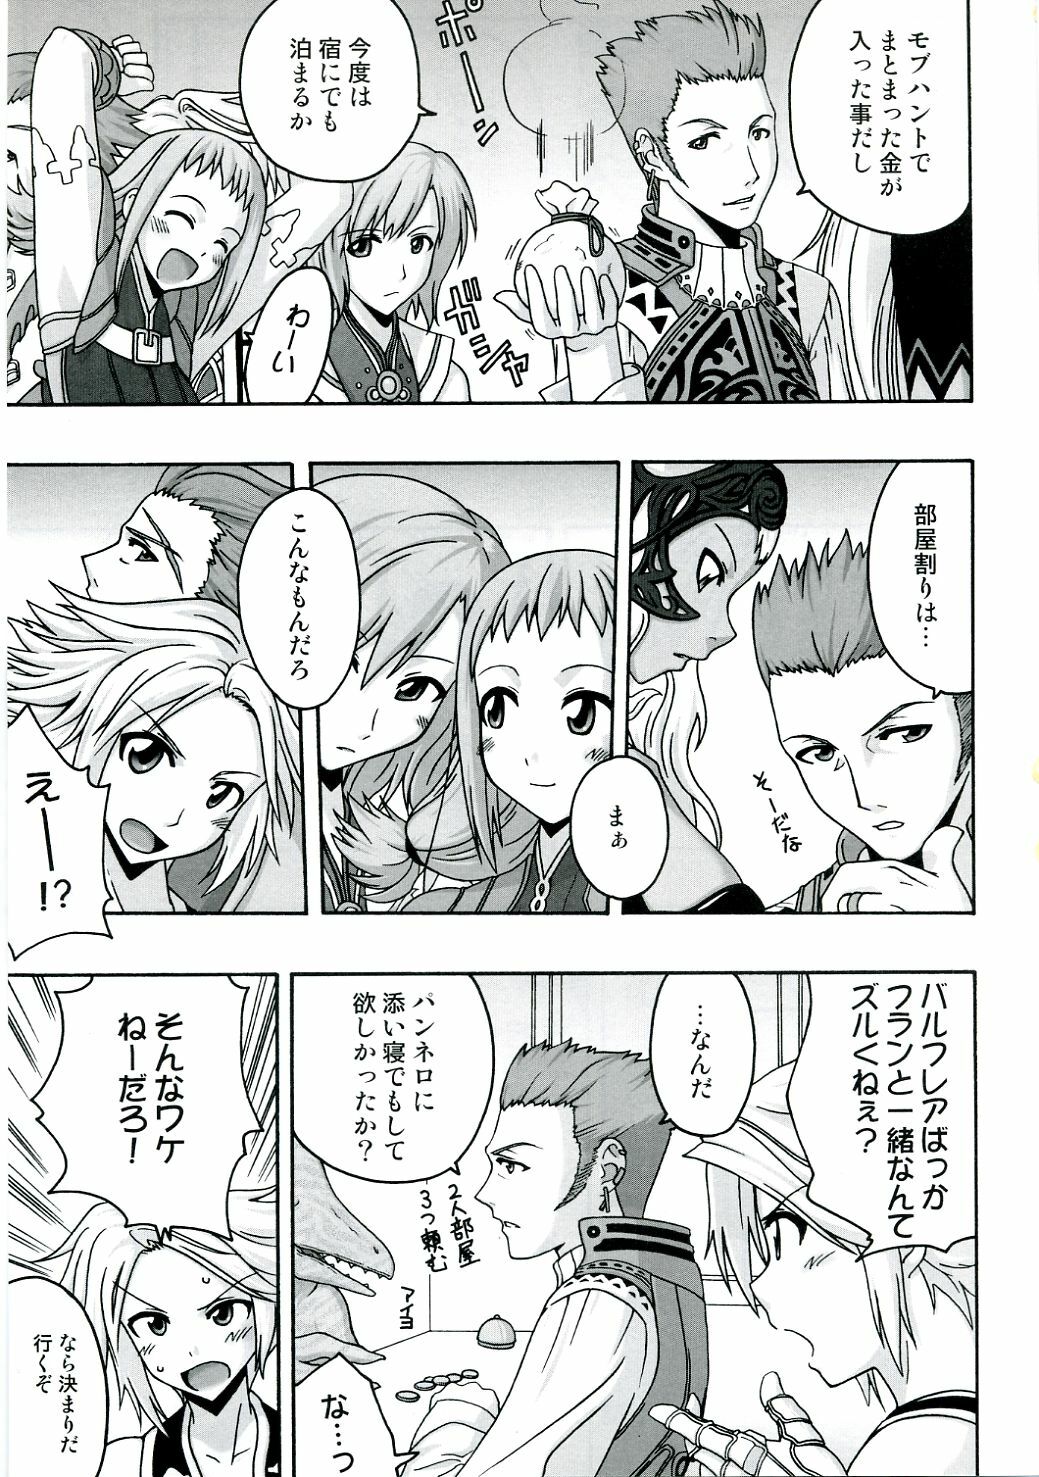 (C70) [FruitsJam (Mikagami Sou)] In The Room (Final Fantasy XII) page 2 full